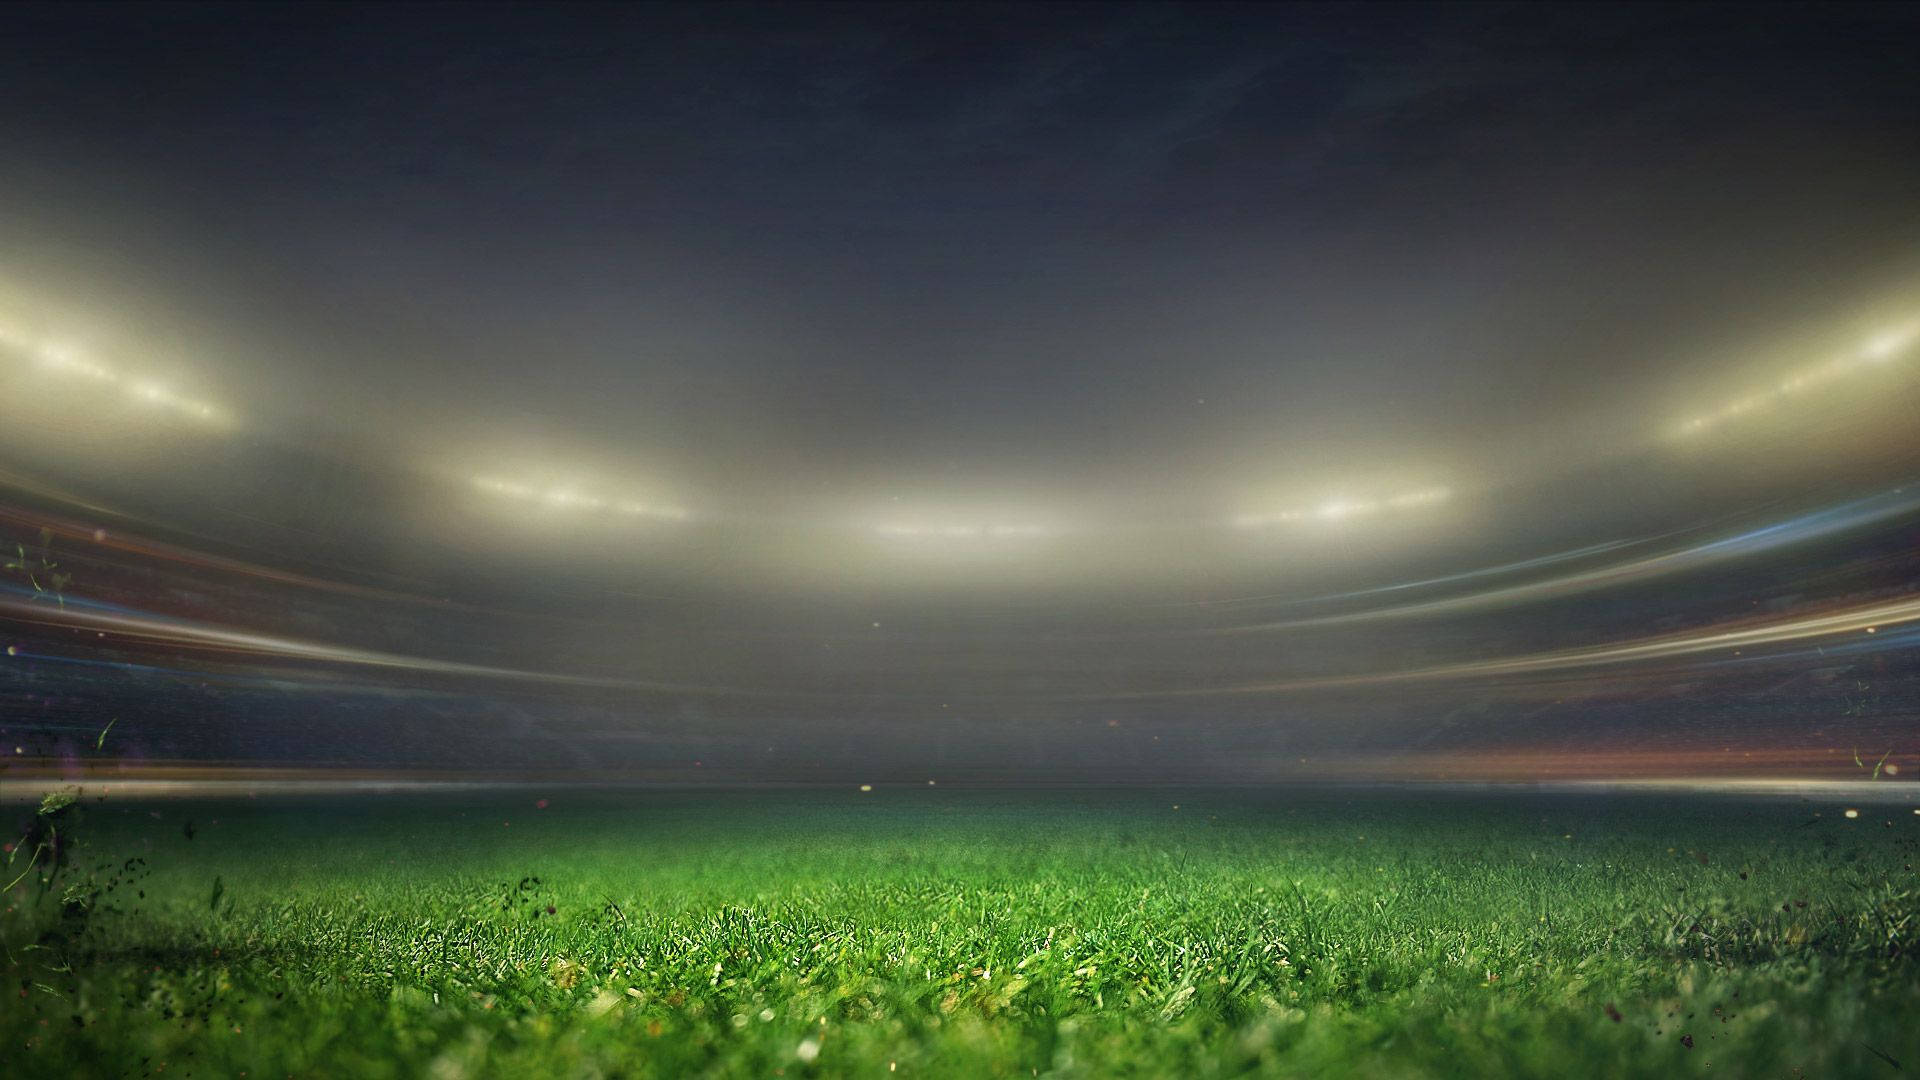 Gorgeous Landscape Of Fifa 21 Green Football Field Background